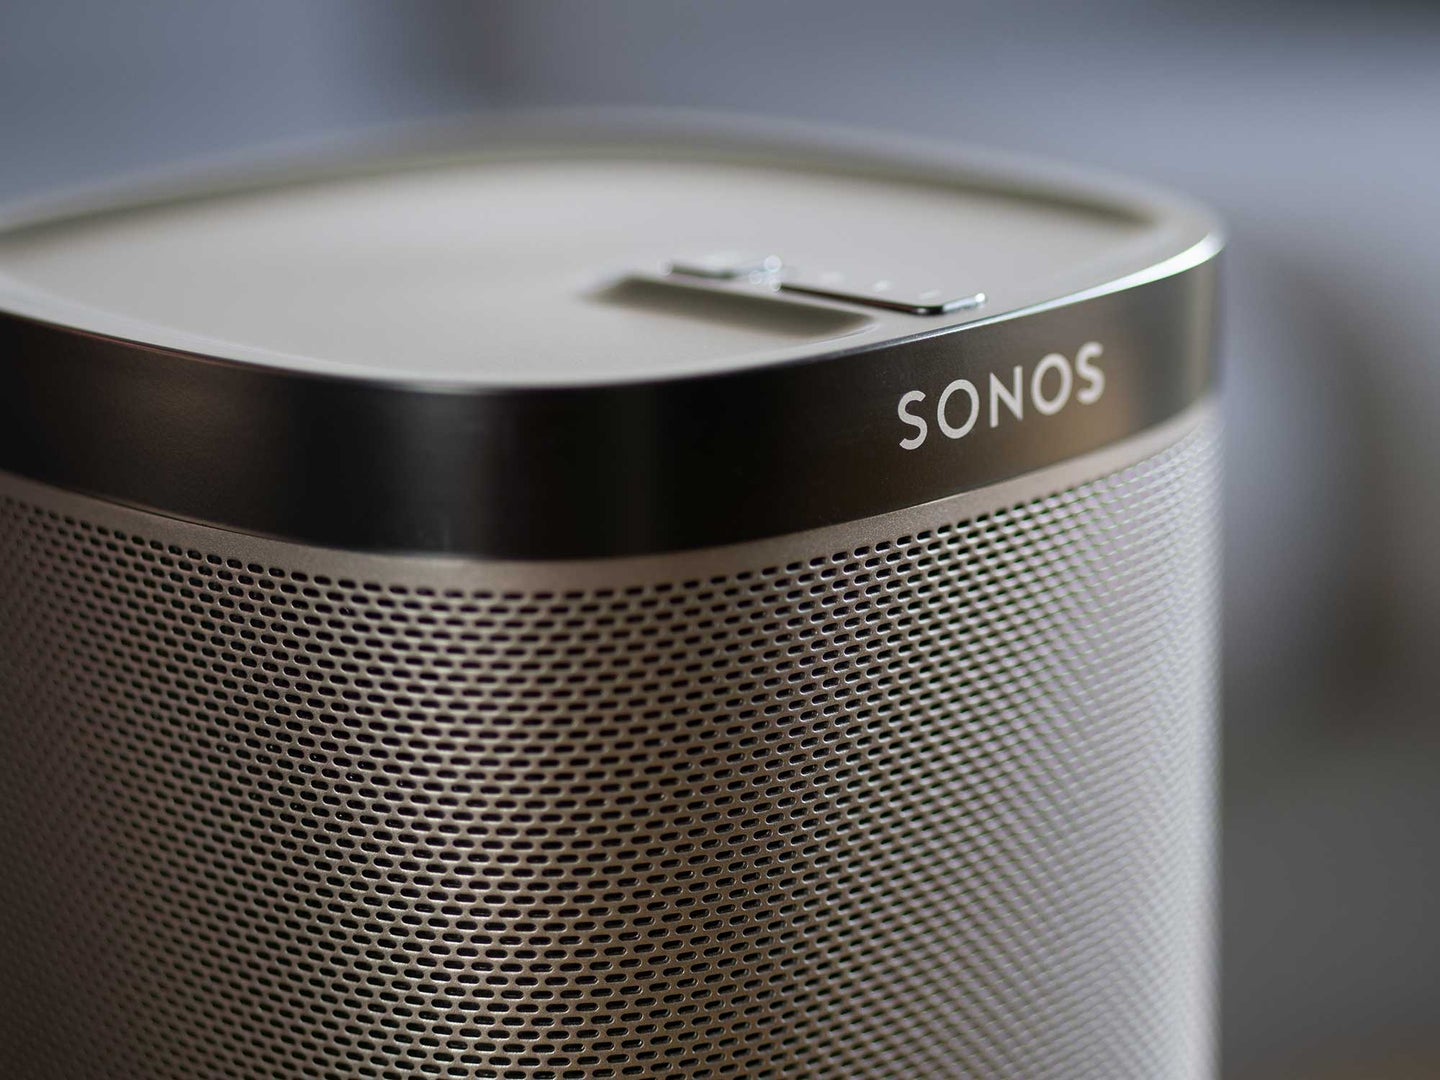 Products mentioned in the new suits that could be affected include Sonos' Move, Arc, Beam, Roam, Roam SL, and One speakers.